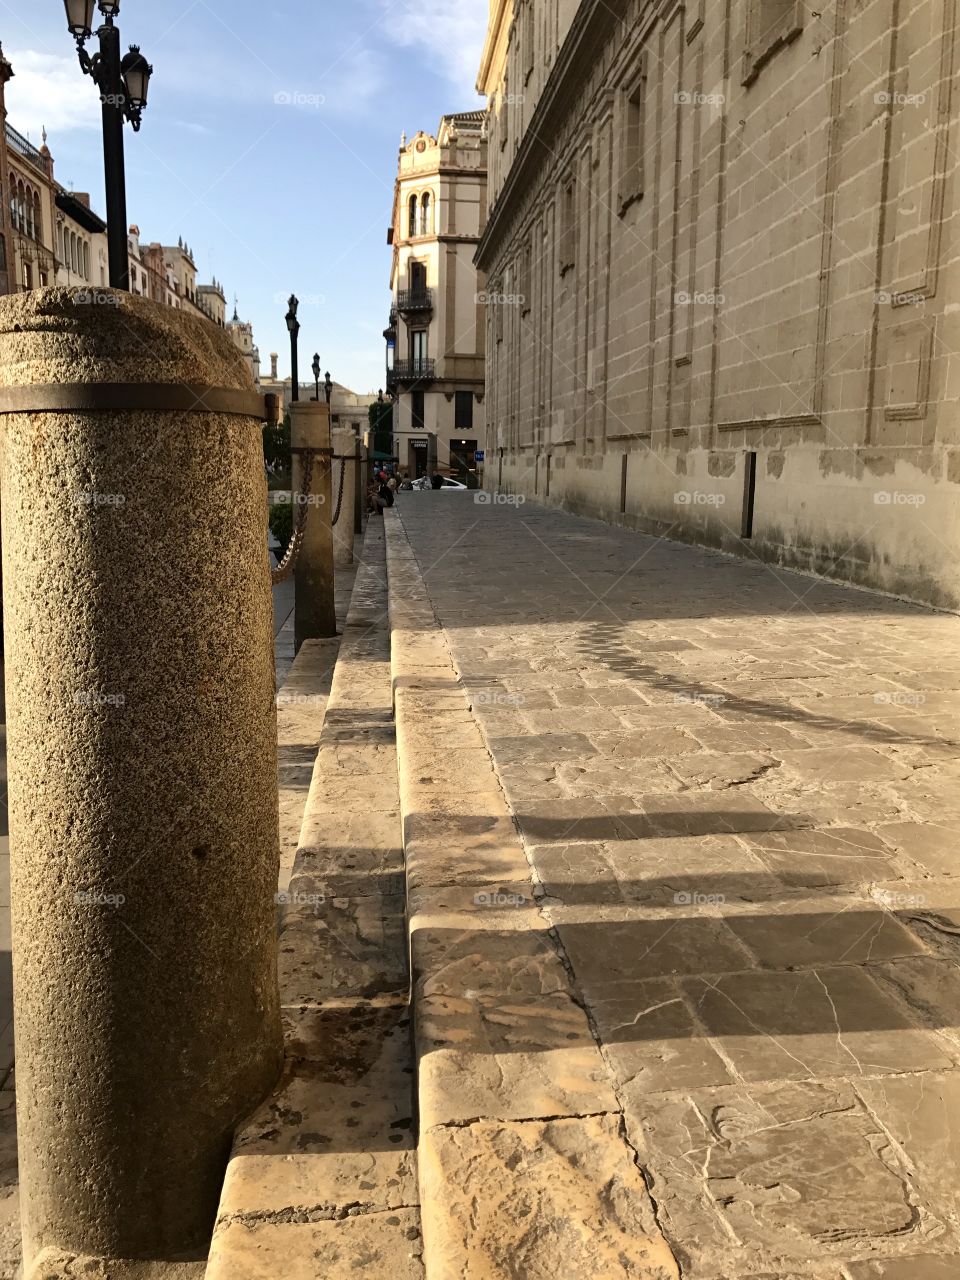 This urban path on the square near the Cathedral in Seville Spain, echos the tales of feet that have past this way for many a century...🌴